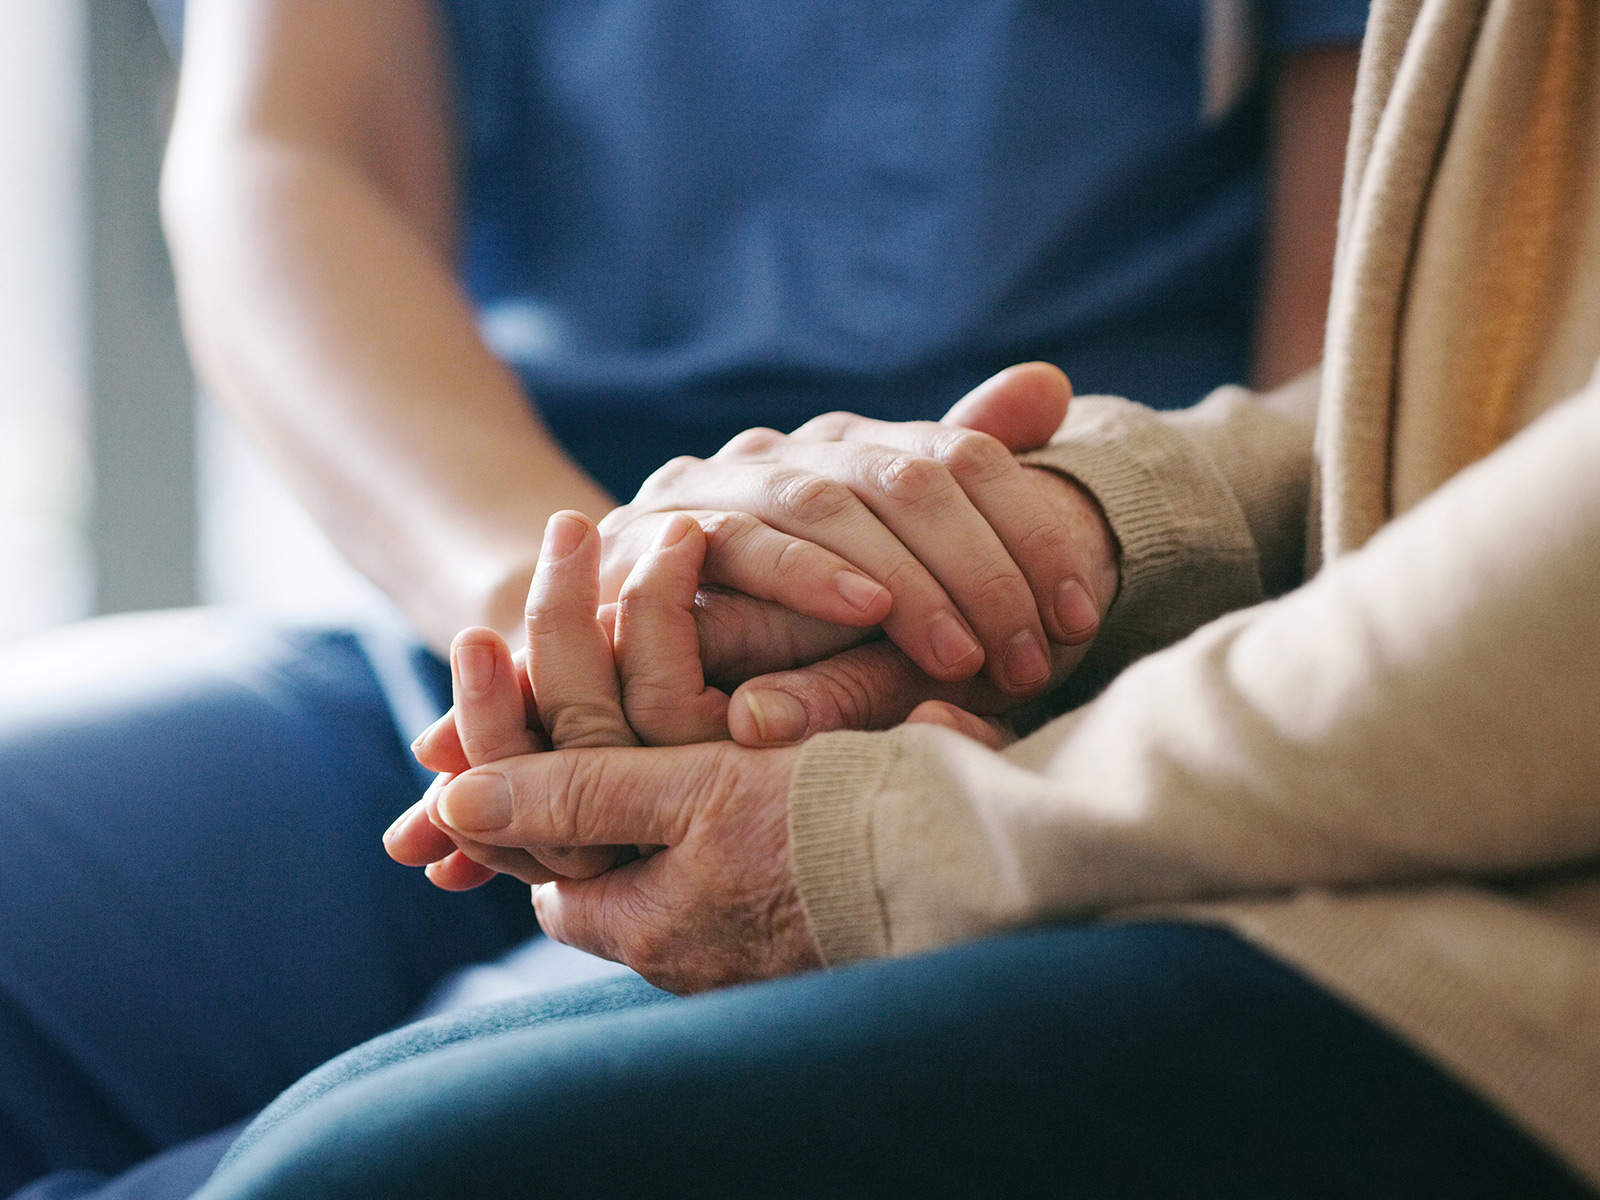 Senior Medicaid member holding hands with a nurse